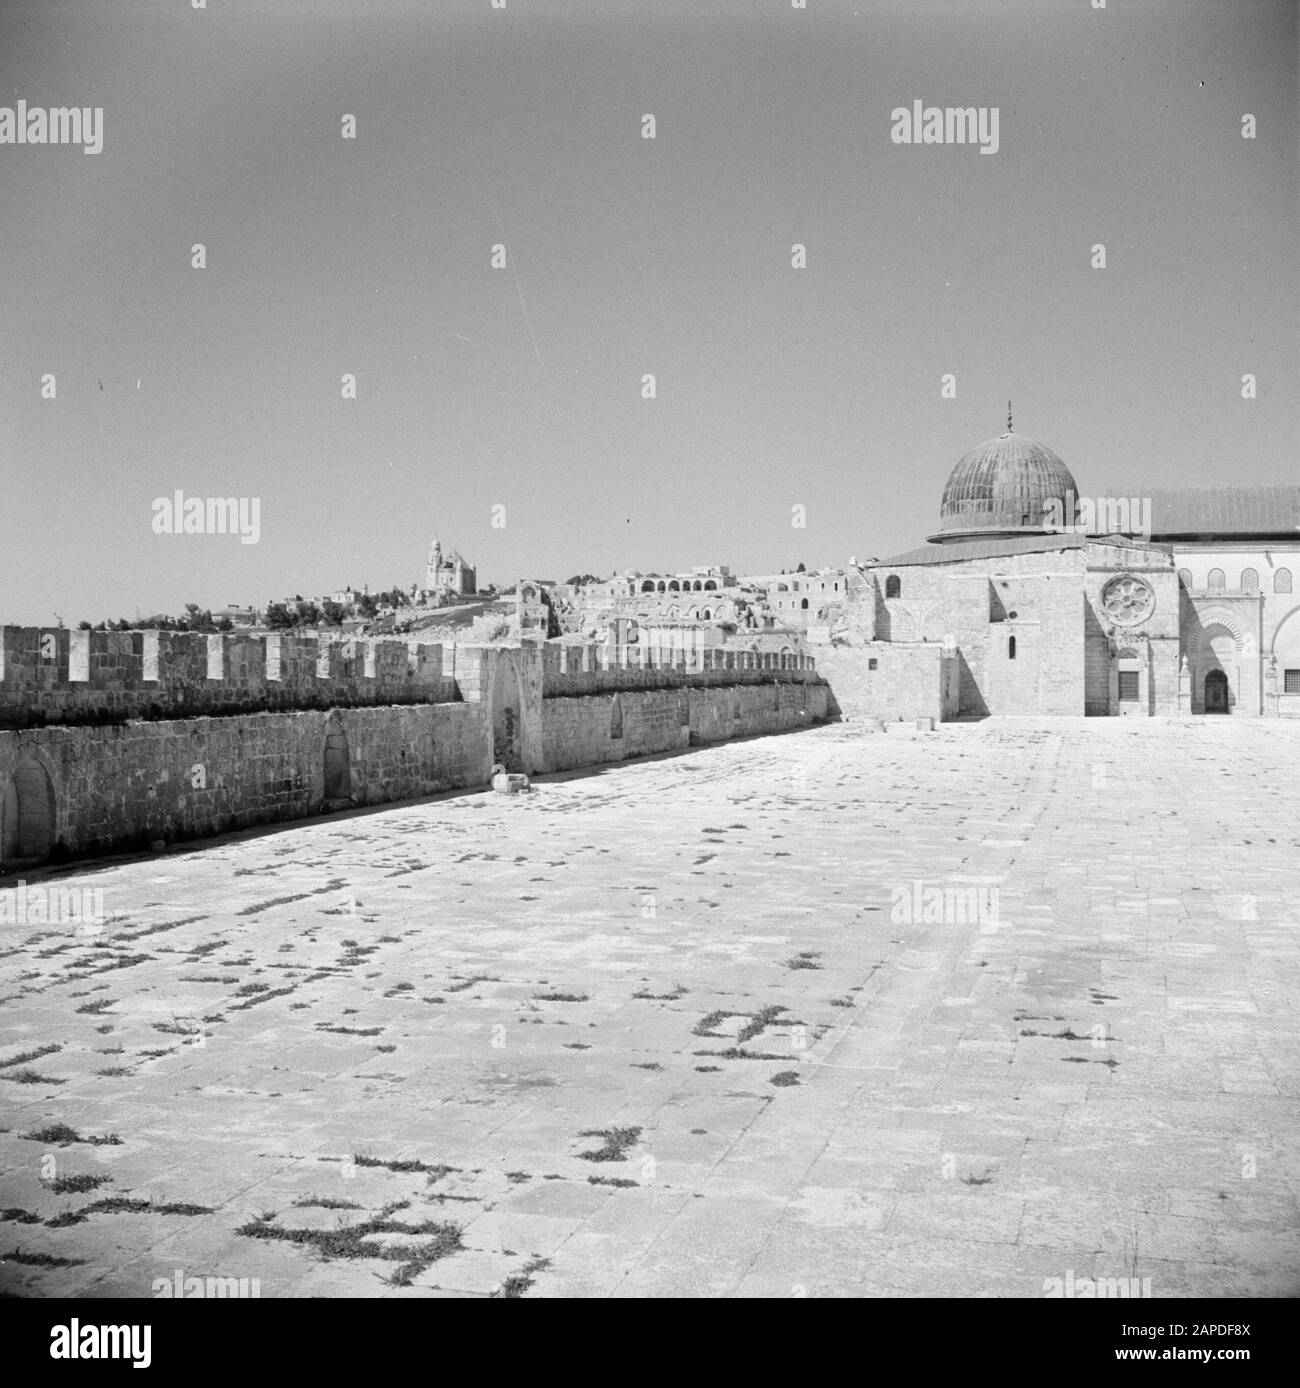 Middle East 1950-1955: Jerusalem Description: Al Haram Esh-Sharif - Temple Mount. Voorplein and Al Aqsa mosque Annotation: At the time of the recording this place was in Jordan Date: 1950 Location: Palestine, Jerusalem, Jordan Keywords: architecture, Islam, domes, mosques, walls, squares, portals, windows Stock Photo